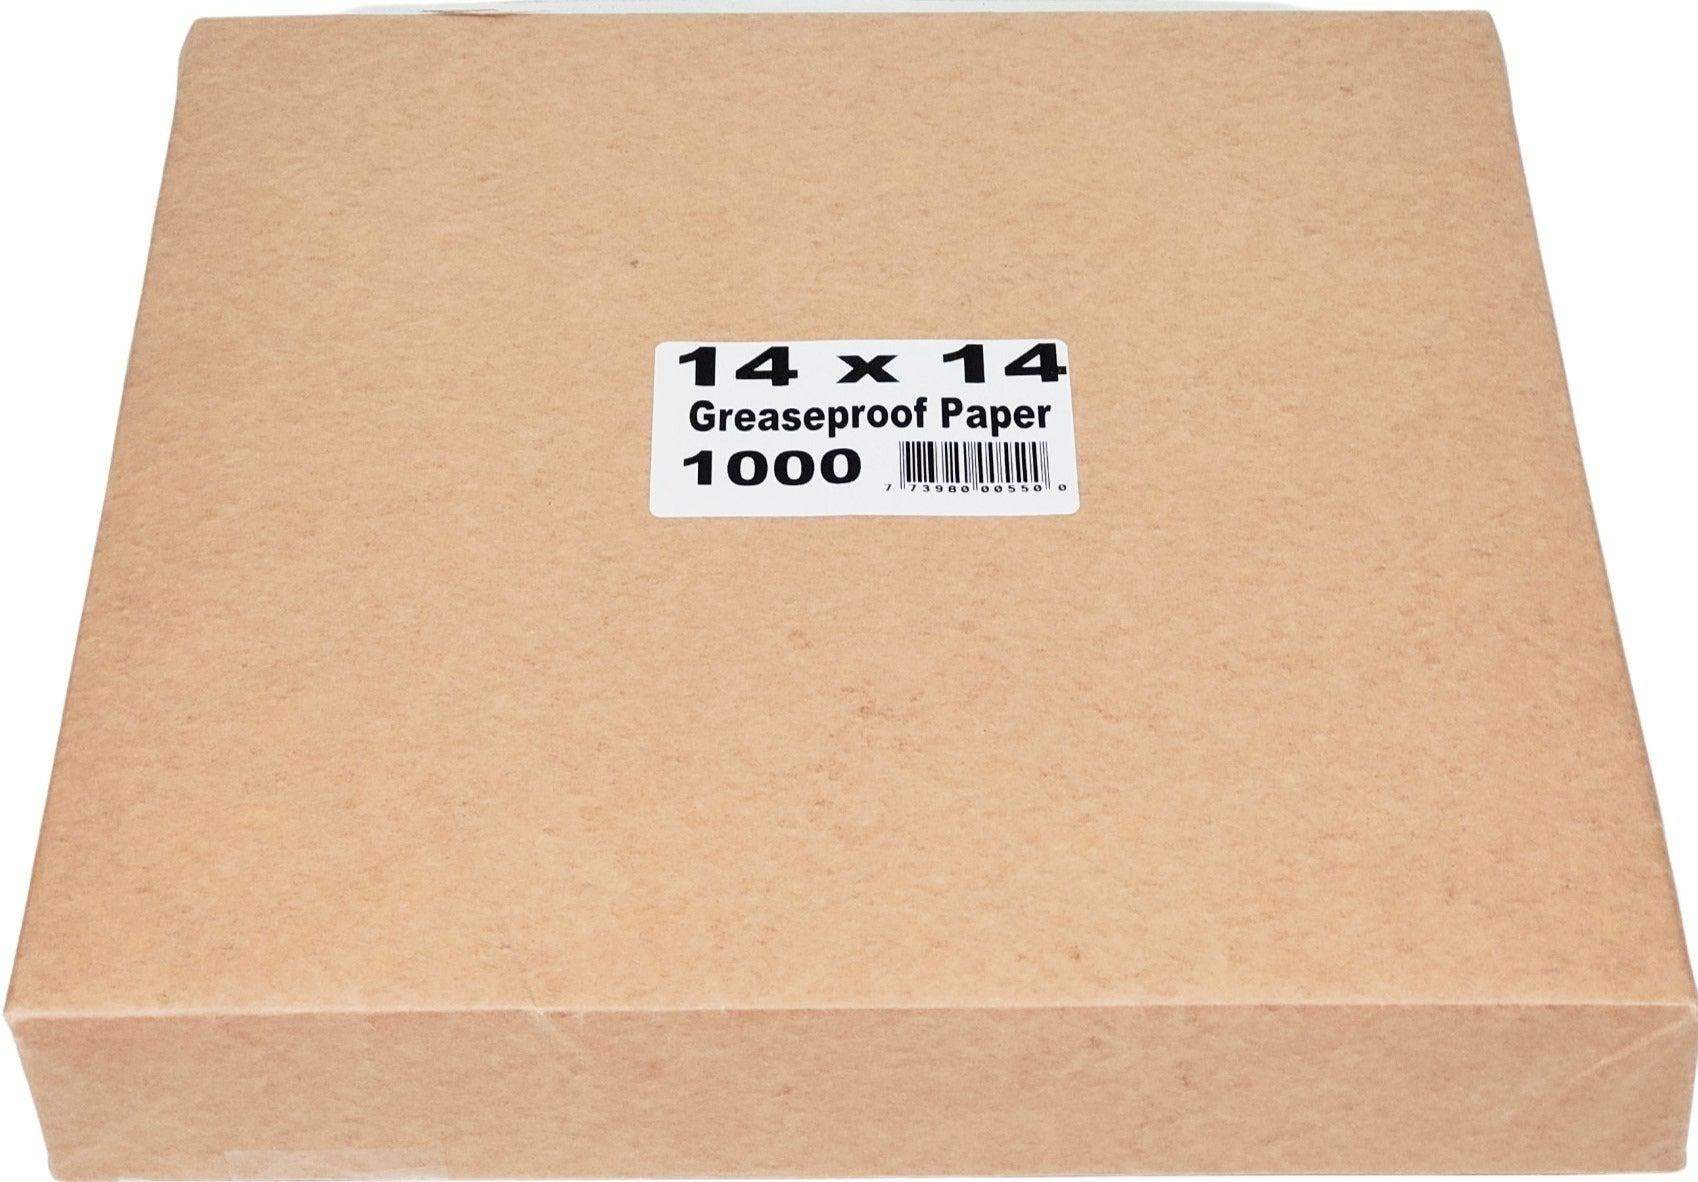 https://www.a1cashandcarry.com/cdn/shop/products/Grease-Proof-Paper-14x14-Packaging-No-Brand-Grease-Proof-Paper-14x14-Packaging-No-Brand-Grease-Proof-Paper-14x14-Packaging-No-Brand-Grease-Proof-Paper-14x14-Packaging-No-Brand-Grease.jpg?v=1671195077